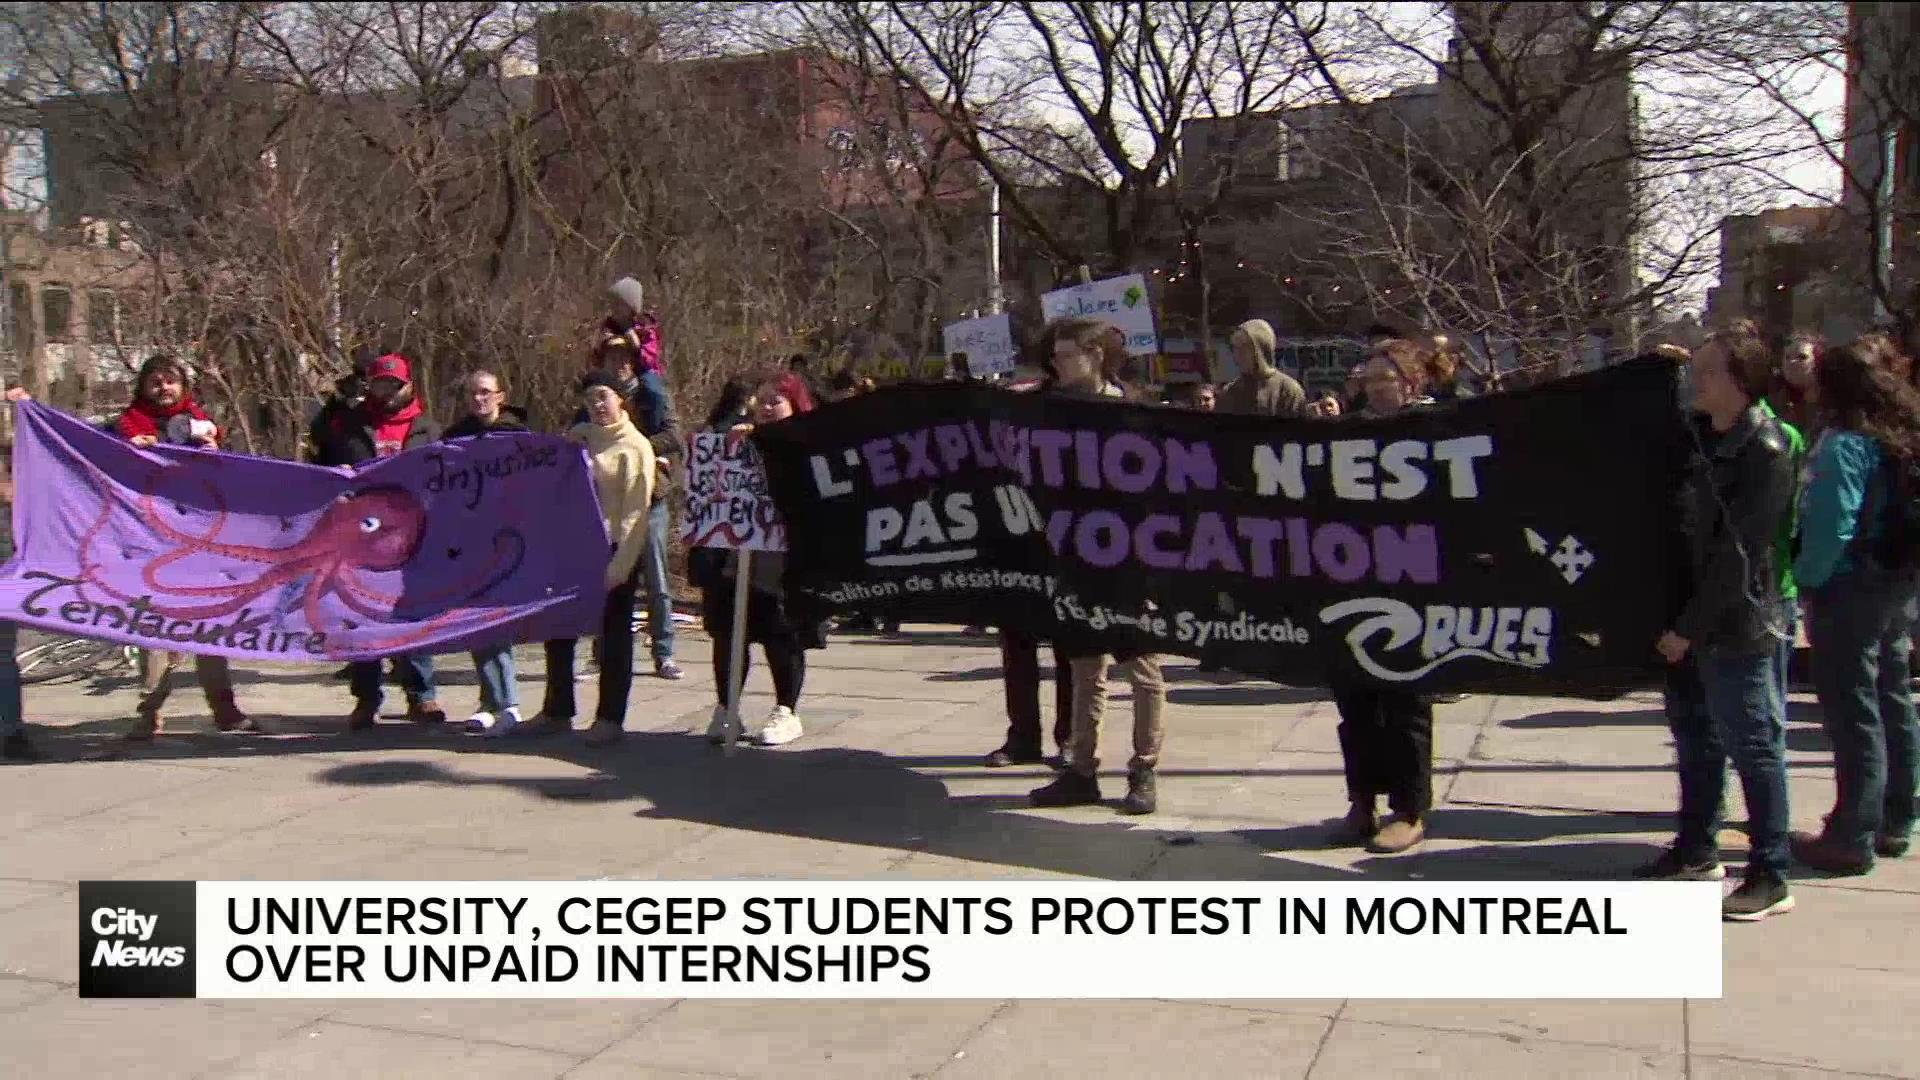 Student protest in Montreal over unpaid internships